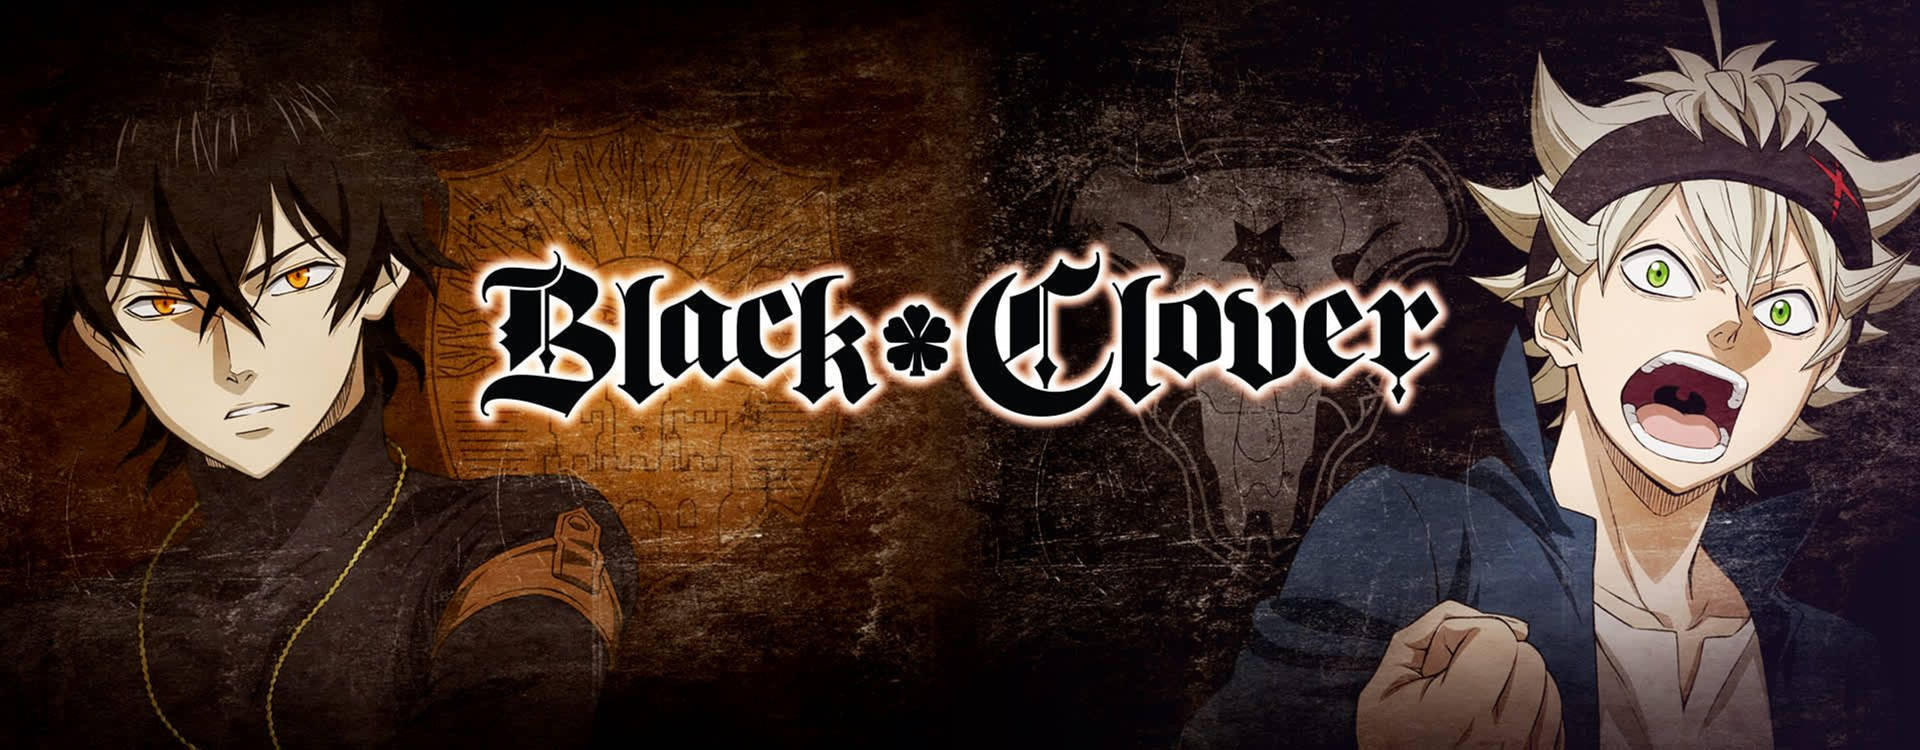 4k Black Clover Cover Photo Picture